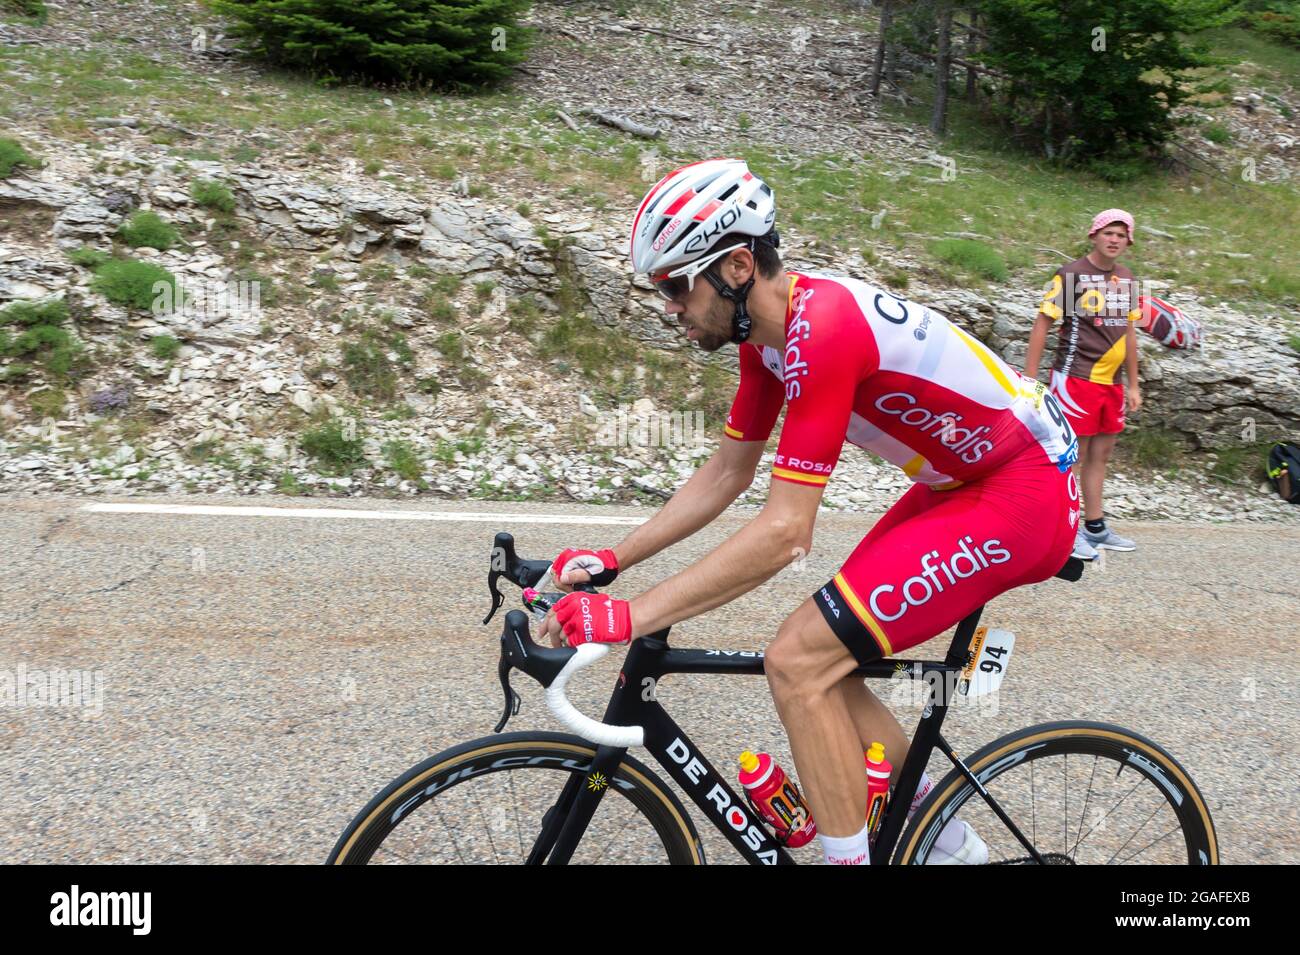 Malaucene, France. 07th July, 2021. Jesus Herrada (team Cofidis) in action during the 11th stage of 2021 Tour de France.The 11th stage of the Tour de France 2021 takes place between Sorgues and Malaucene and includes two ascents of Mont-Ventoux . The winner of the stage is Wout van Aert (Jumbo Visma team) and the final winner of the general classification of the 2021 Tour de France is the Slovenian rider of the UAE Team Emirates Tadej Pogacar. (Photo by Laurent Coust/SOPA Images/Sipa USA) Credit: Sipa USA/Alamy Live News Stock Photo